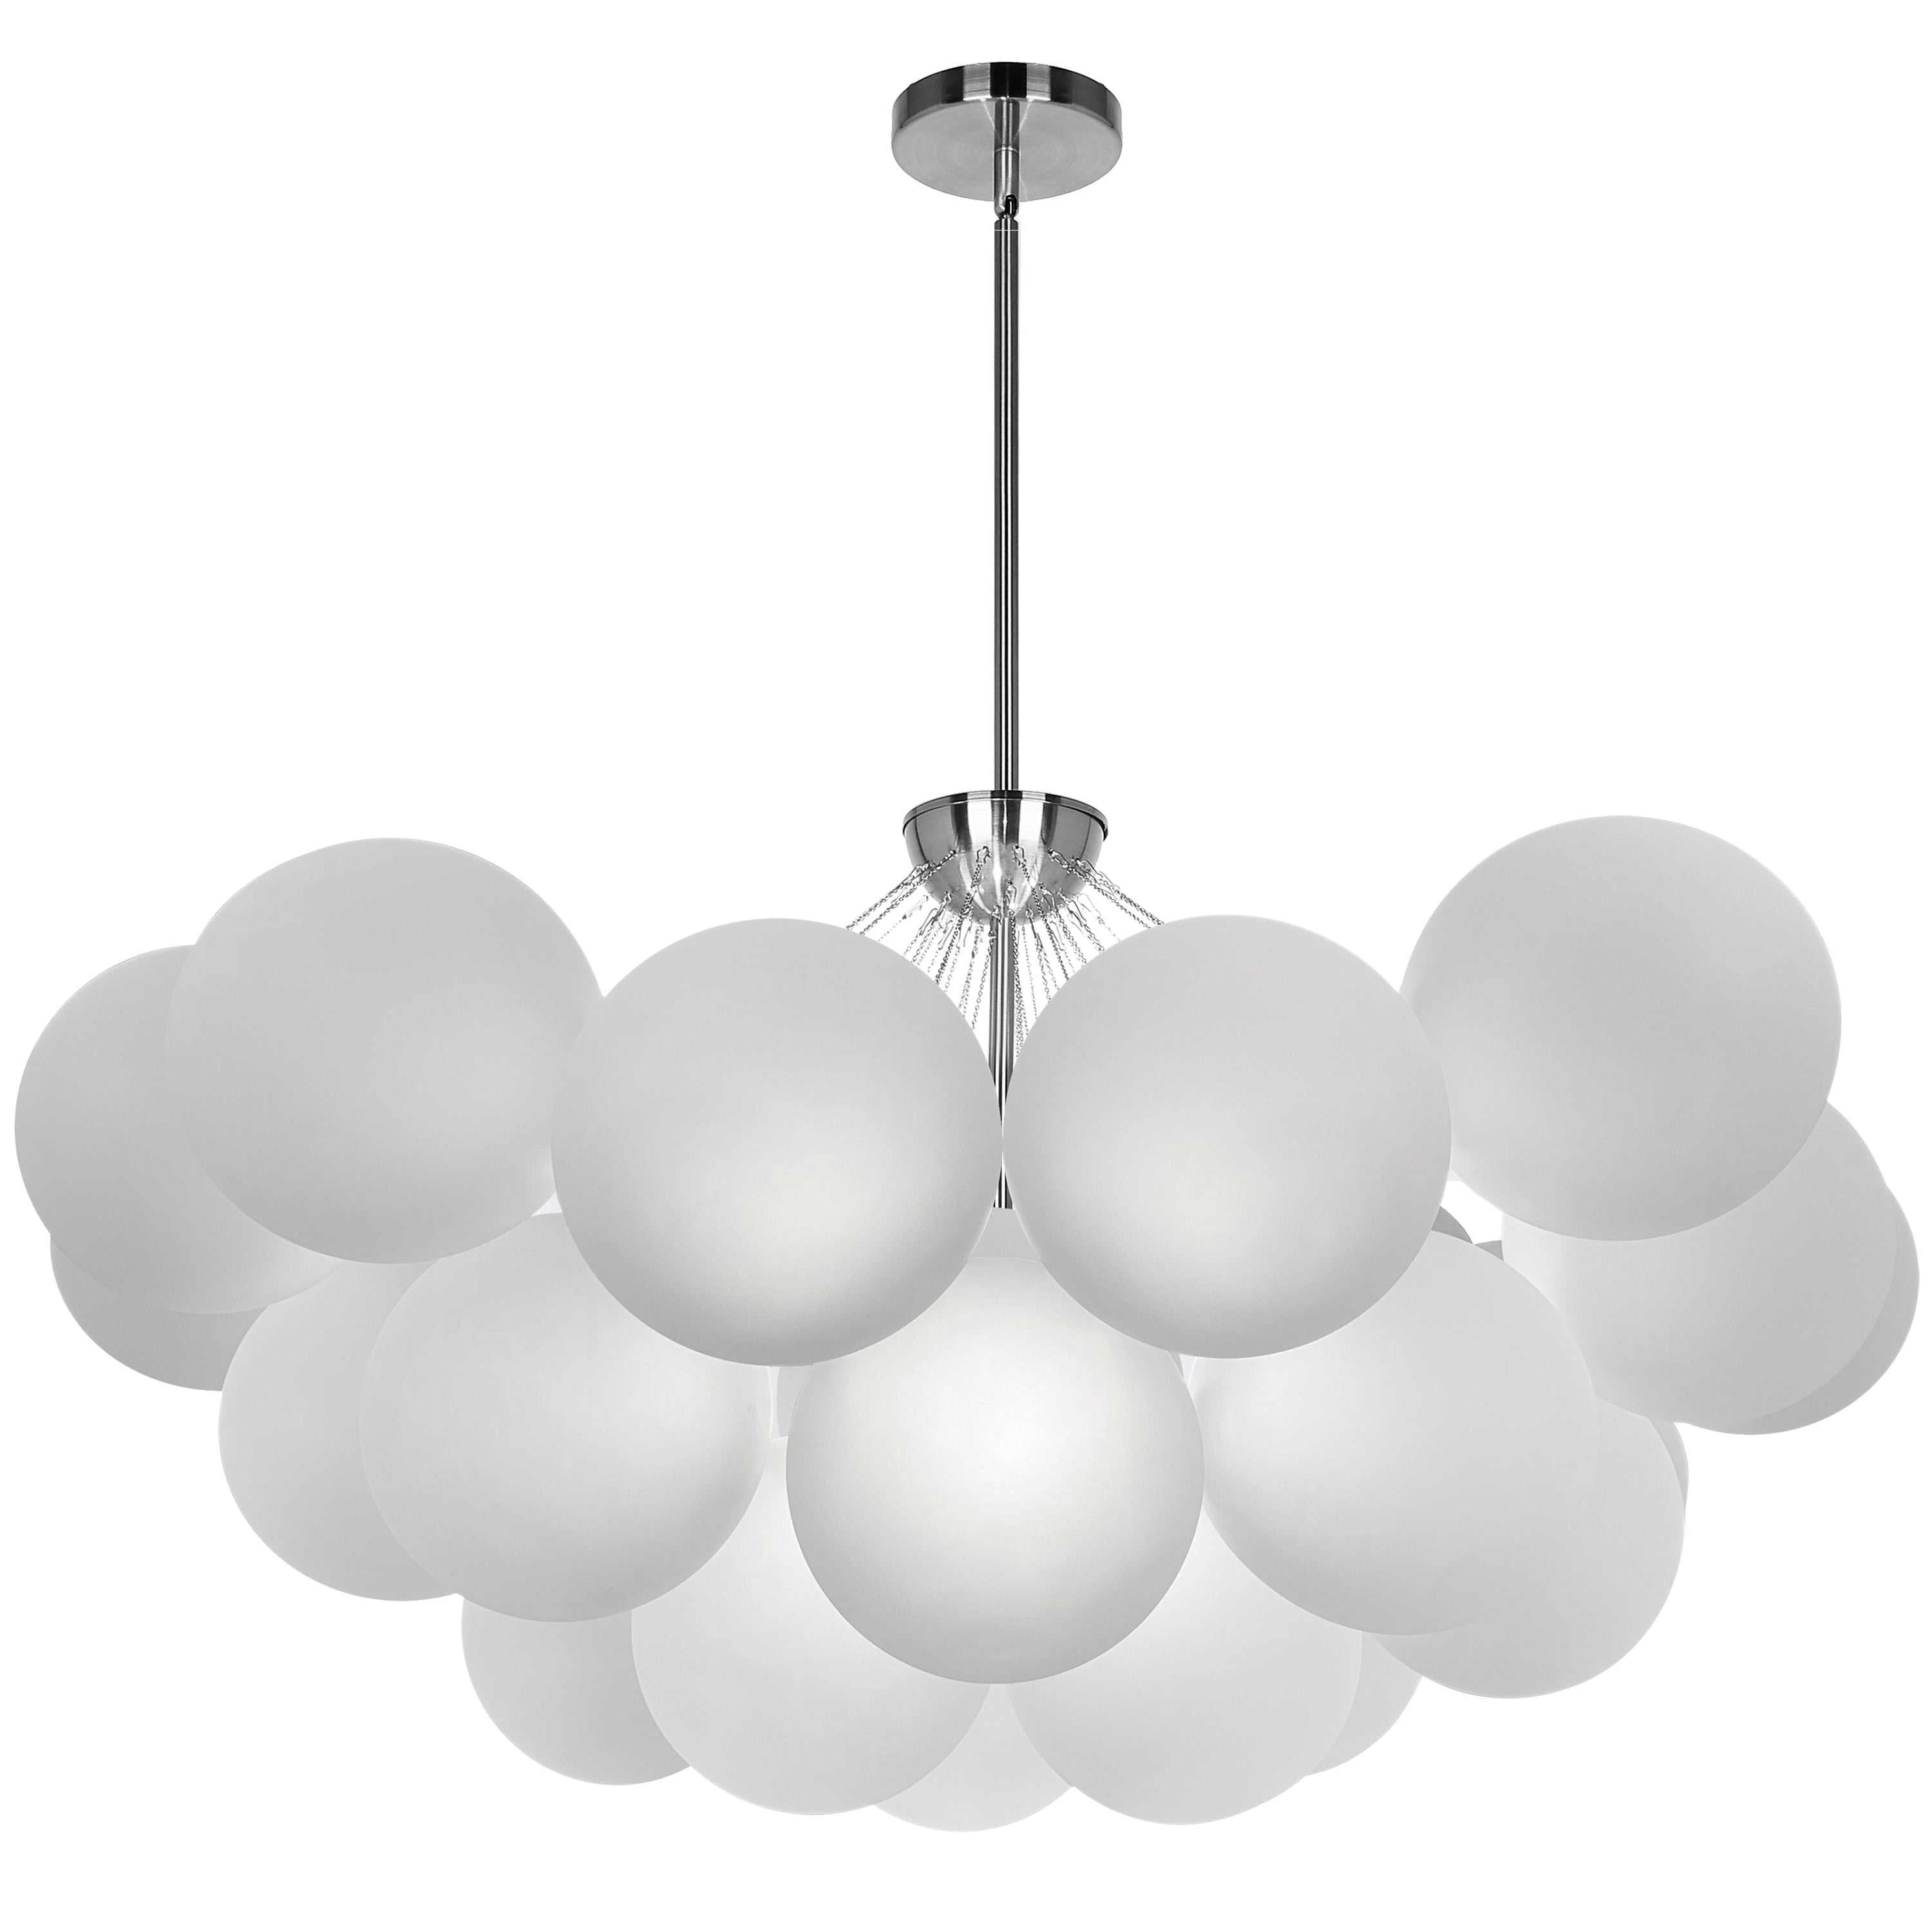 Dainolite Miles - MLS-358C-PC-FR - 8 Light Polished Chrome Chandelier Fixture w/ Frosted Glass - White